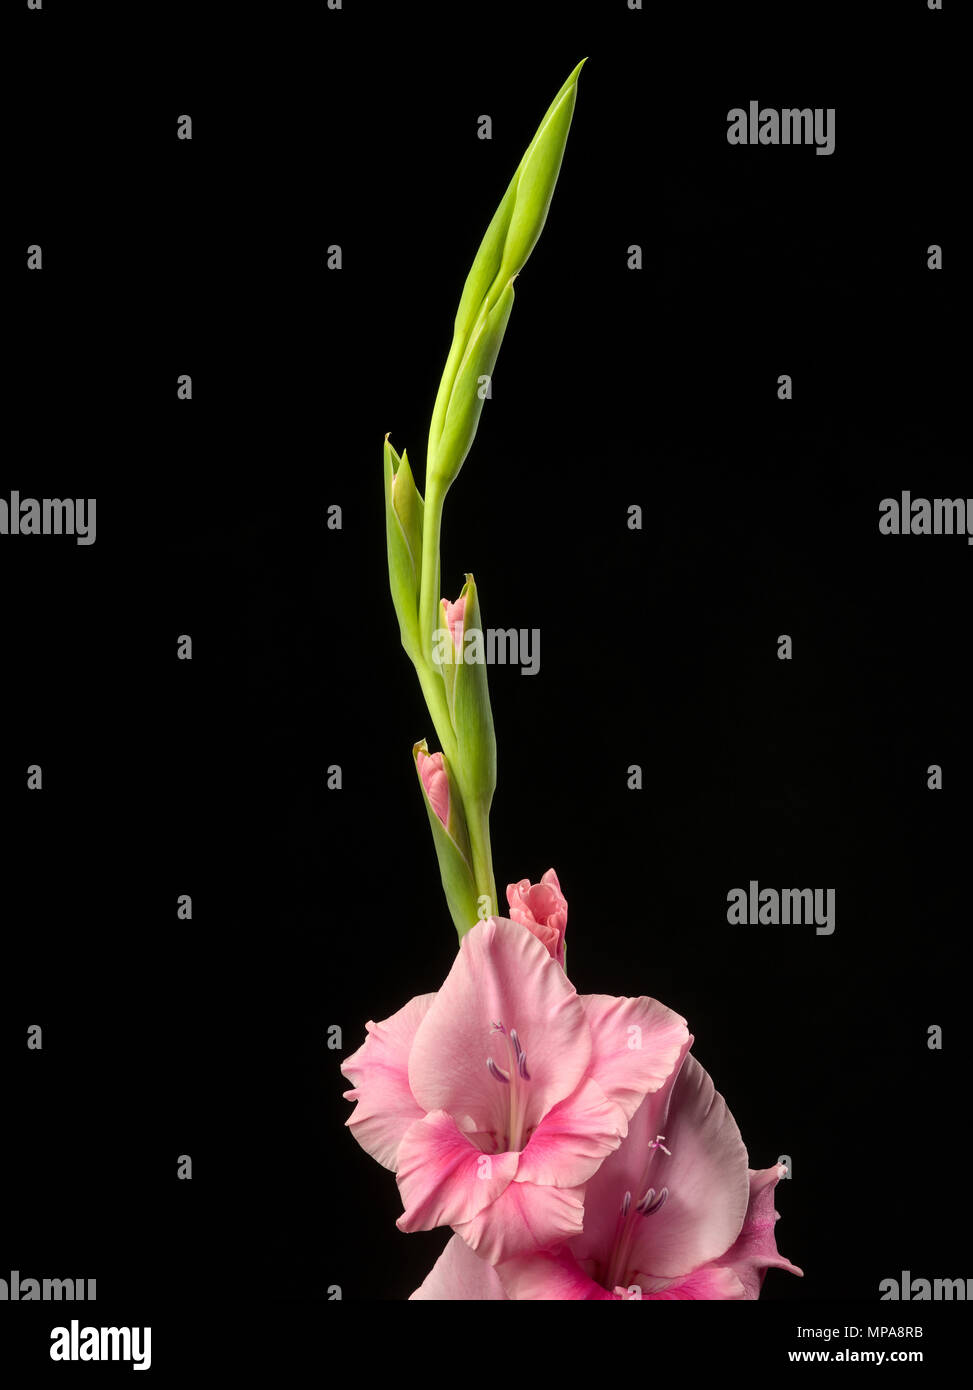 Flower buds on a stem of Gladioli plant, all in various stages of opening. Stock Photo